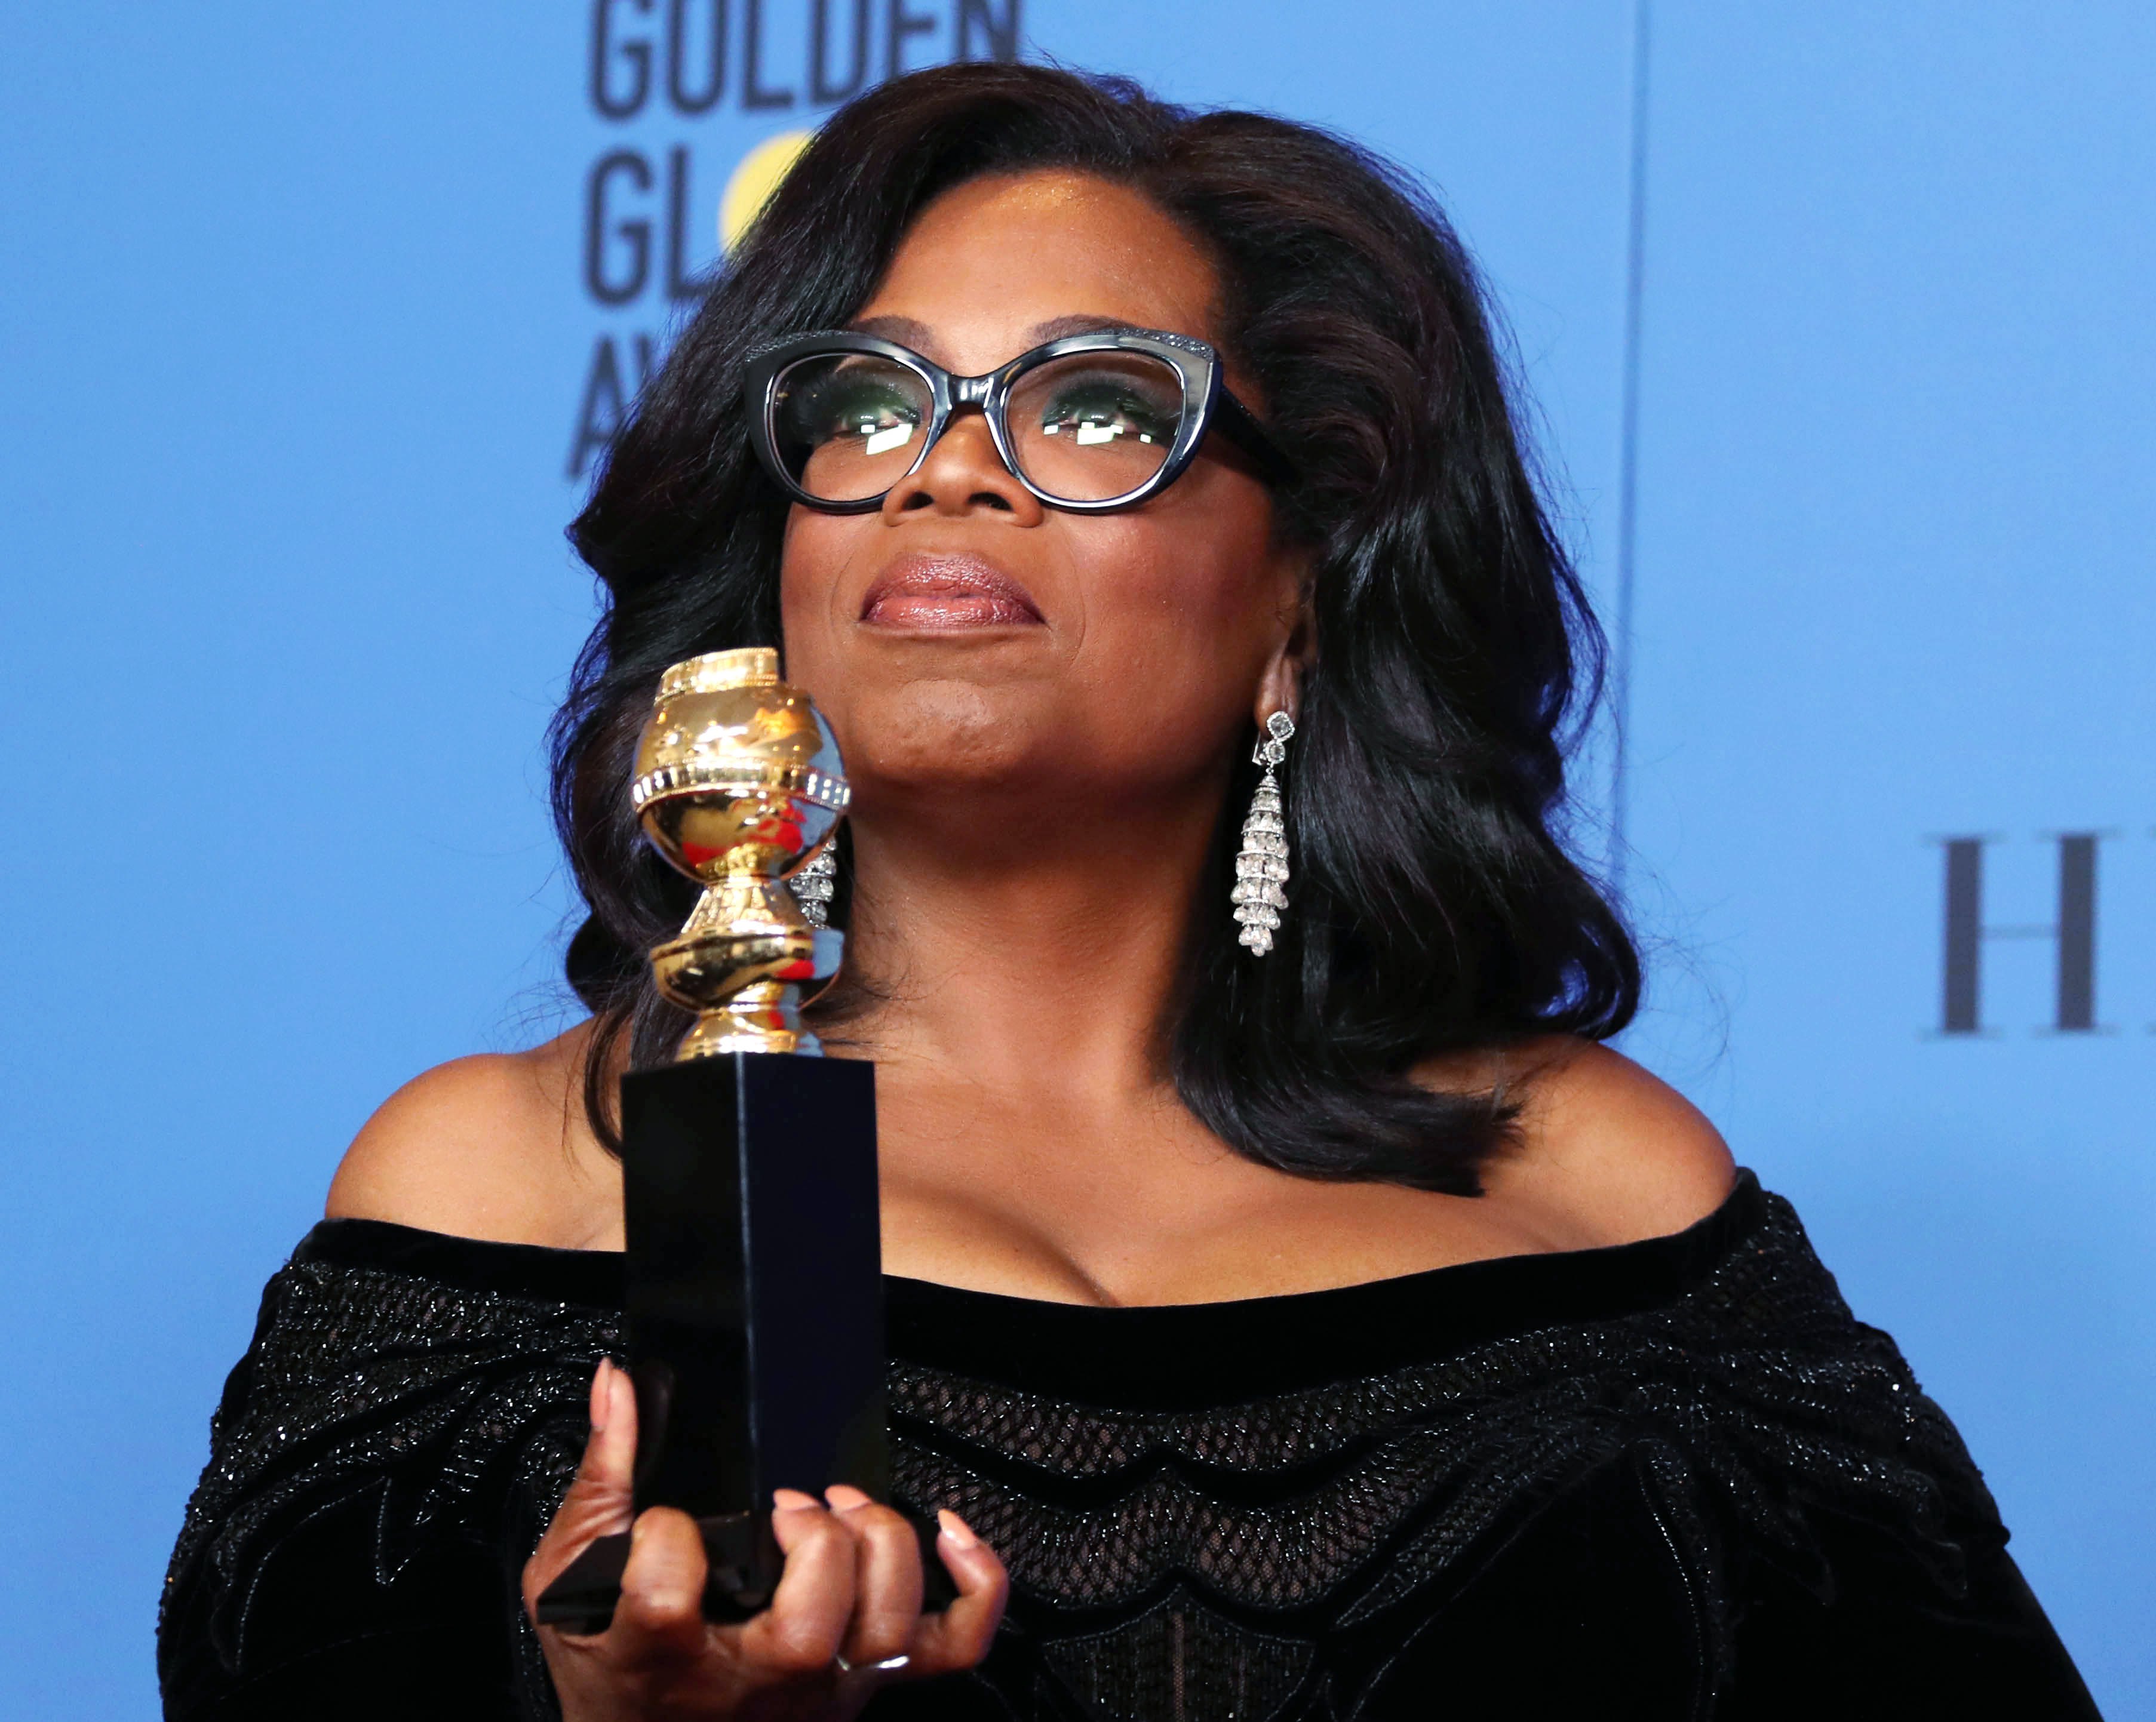 epa06424215 Oprah Winfrey holds the 2018 Golden Globe Cecil B. DeMille Award in the press room during the 75th annual Golden Globe Awards ceremony at the Beverly Hilton Hotel in Beverly Hills, California, USA, 07 January 2018.  EPA/MIKE NELSON